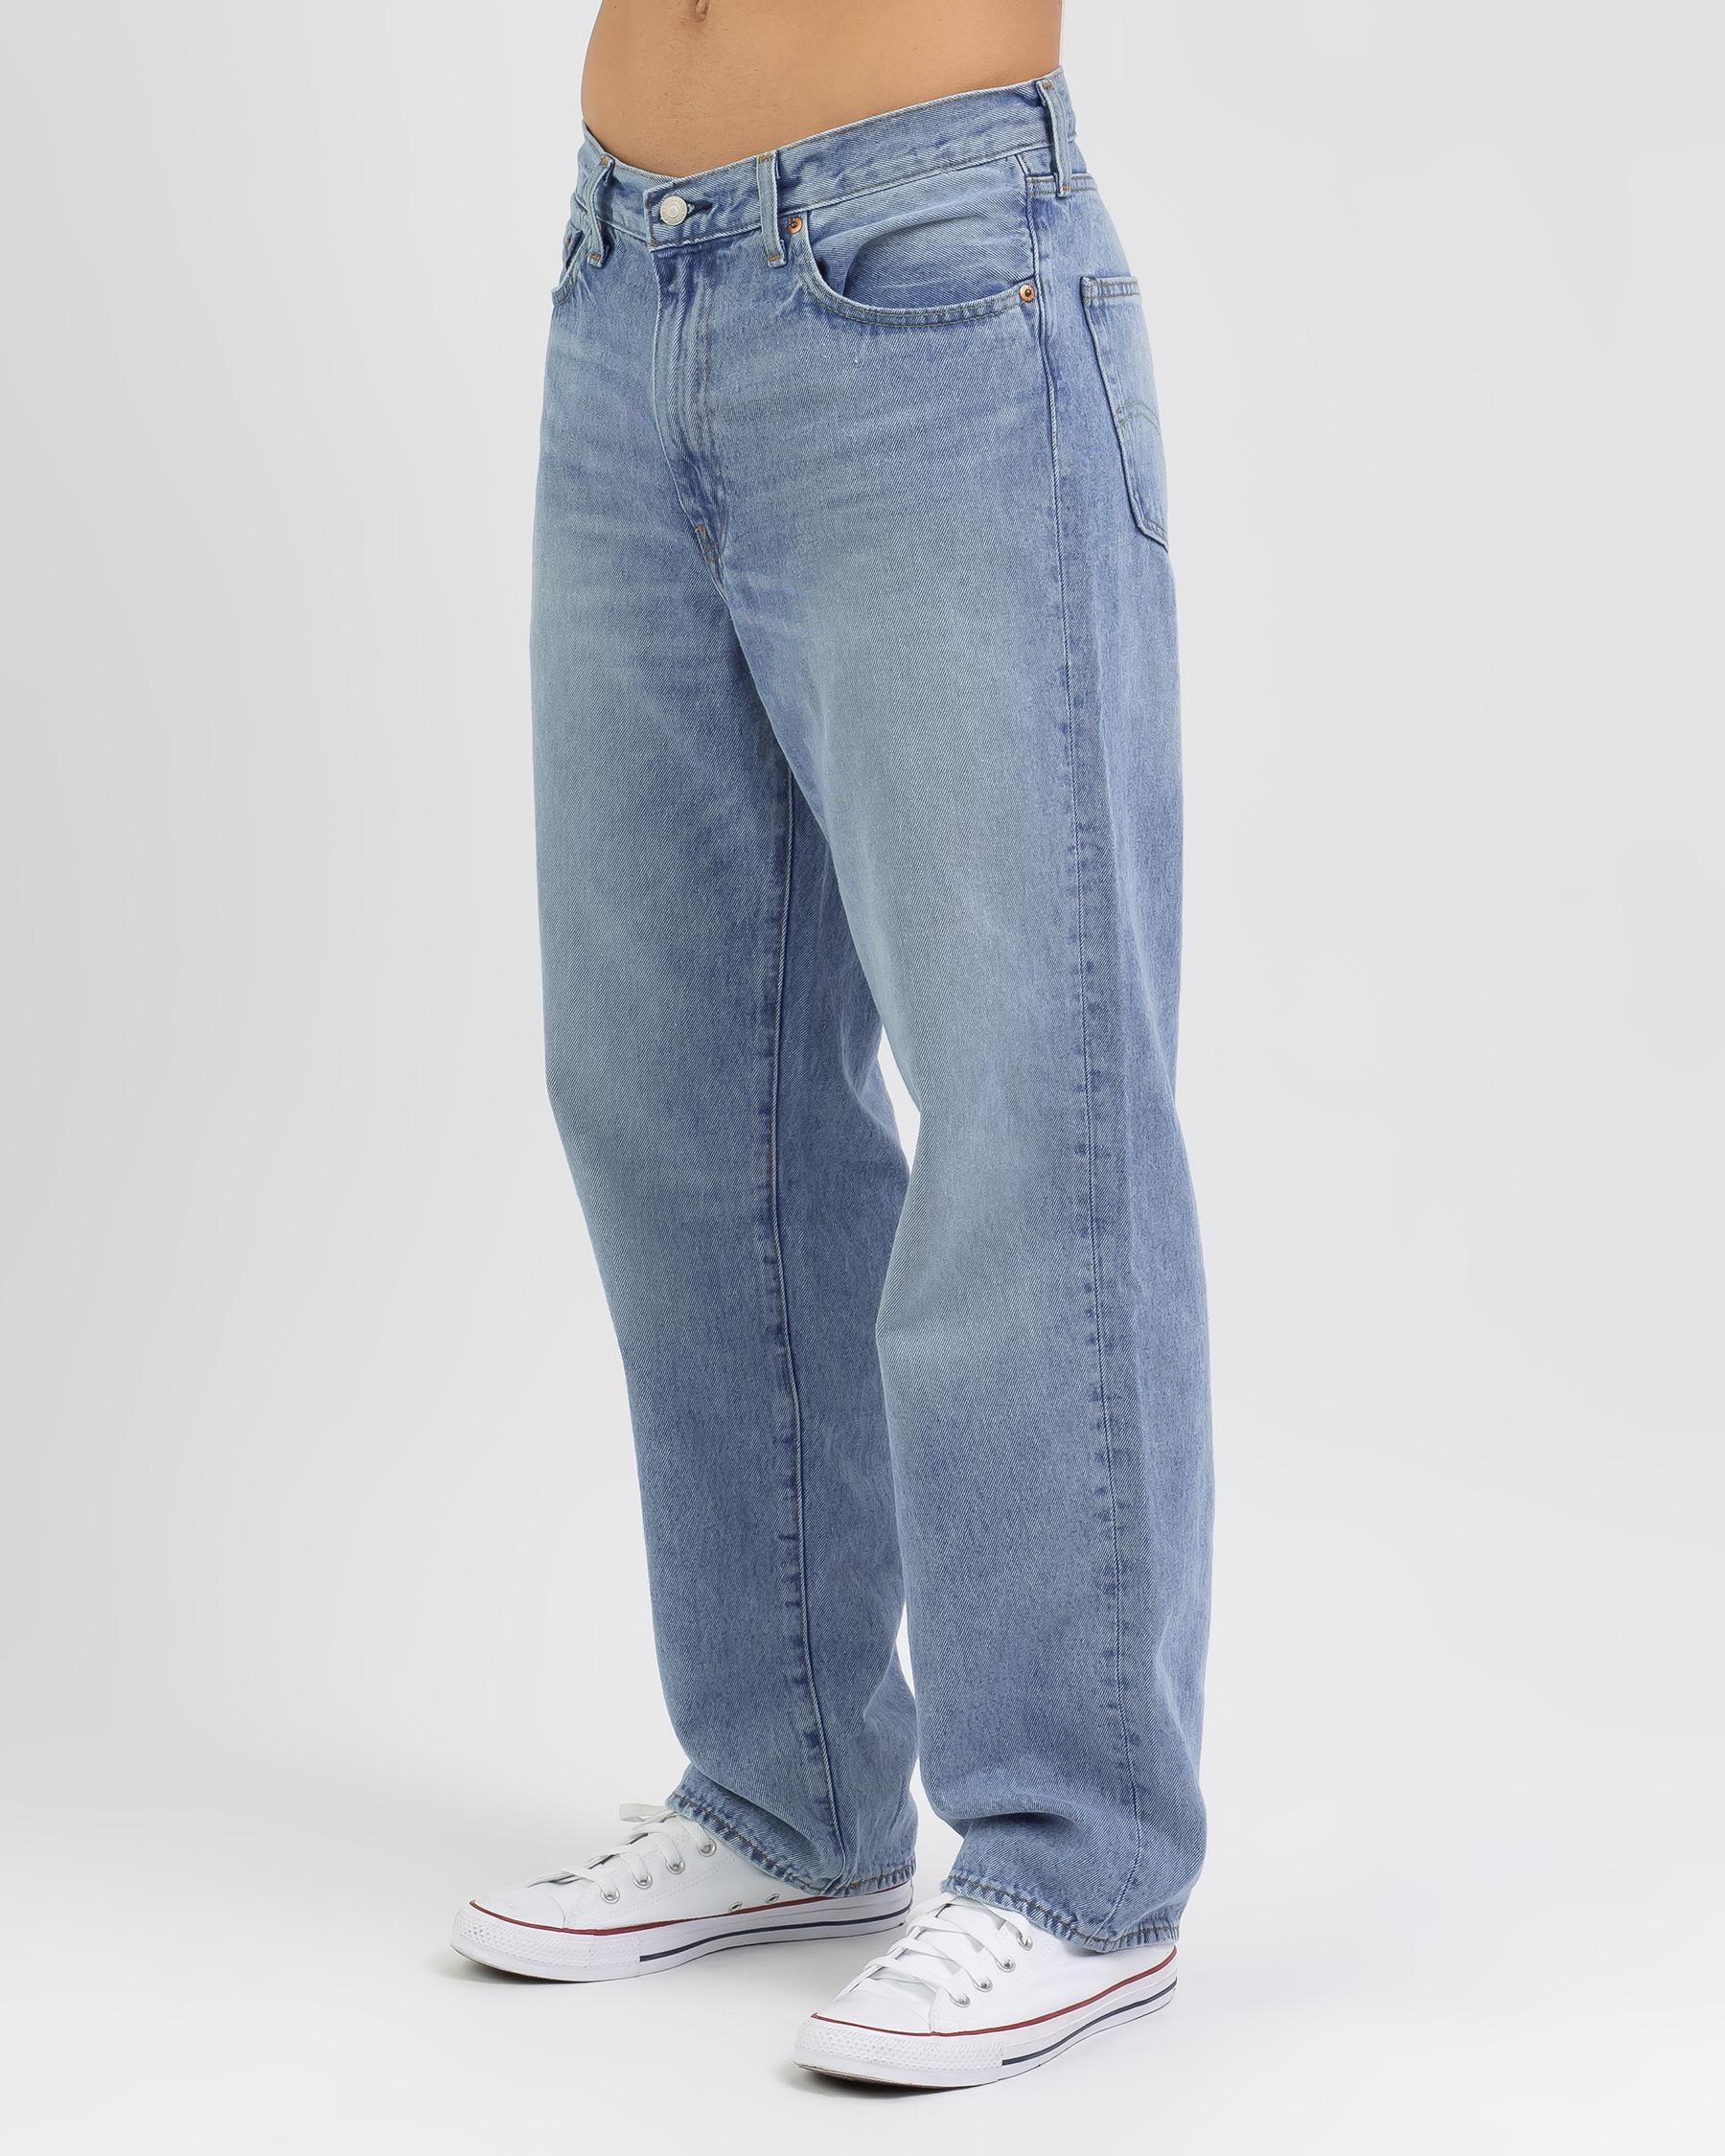 Levi's Stay Loose Denim Jeans In Service Light - Fast Shipping & Easy ...